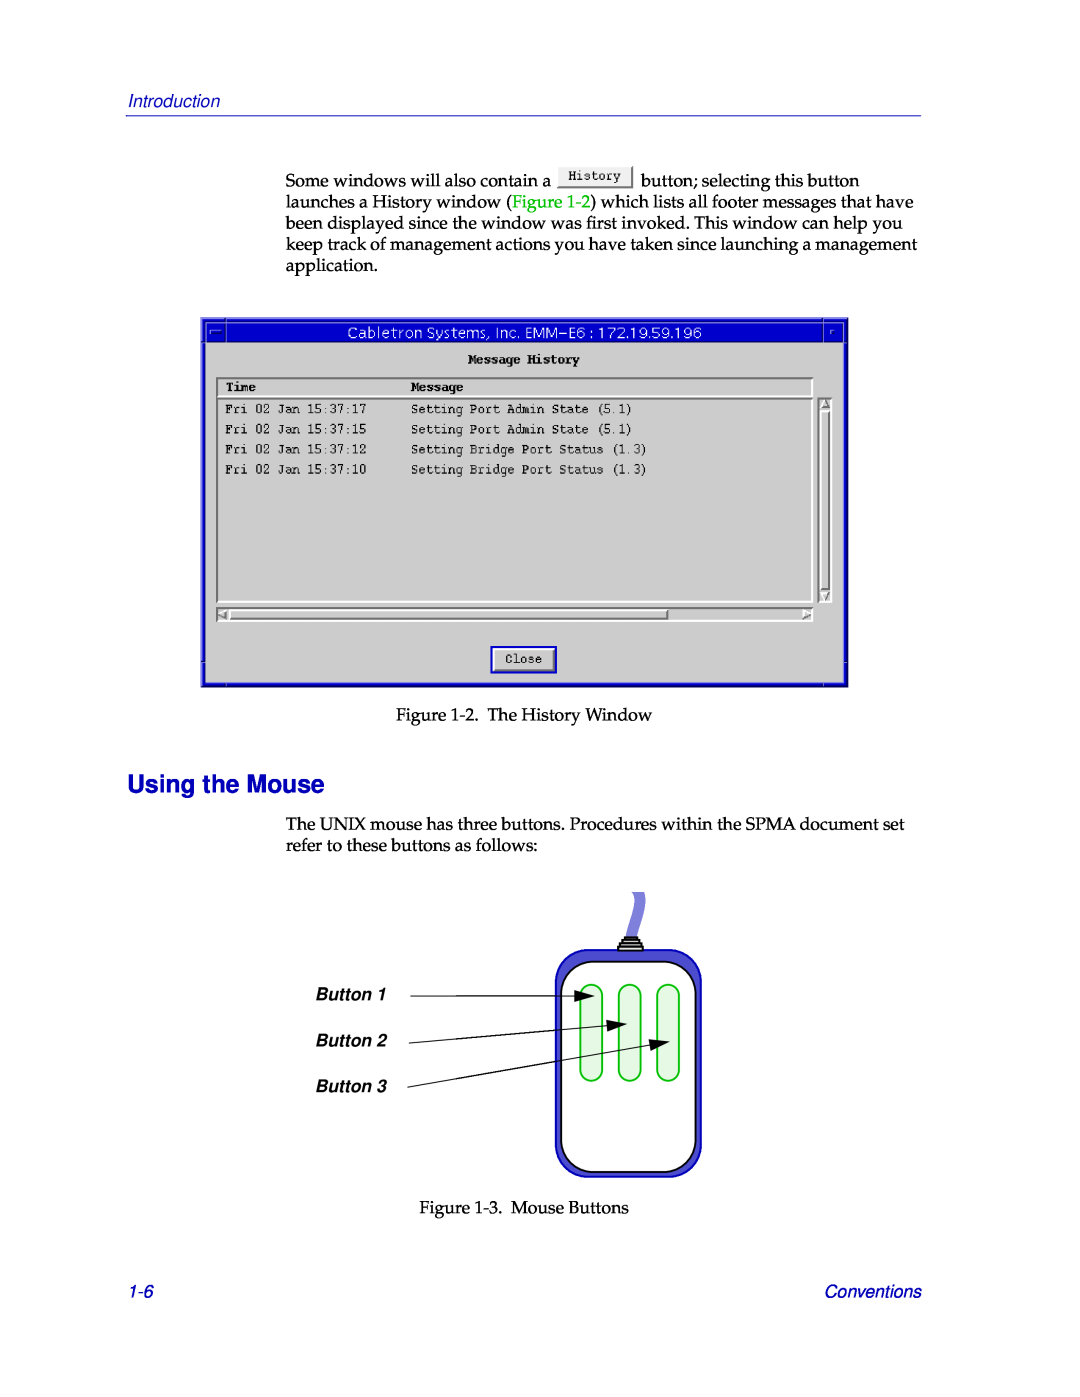 Cabletron Systems EMM-E6 manual Using the Mouse, Button Button Button, Introduction, Conventions 